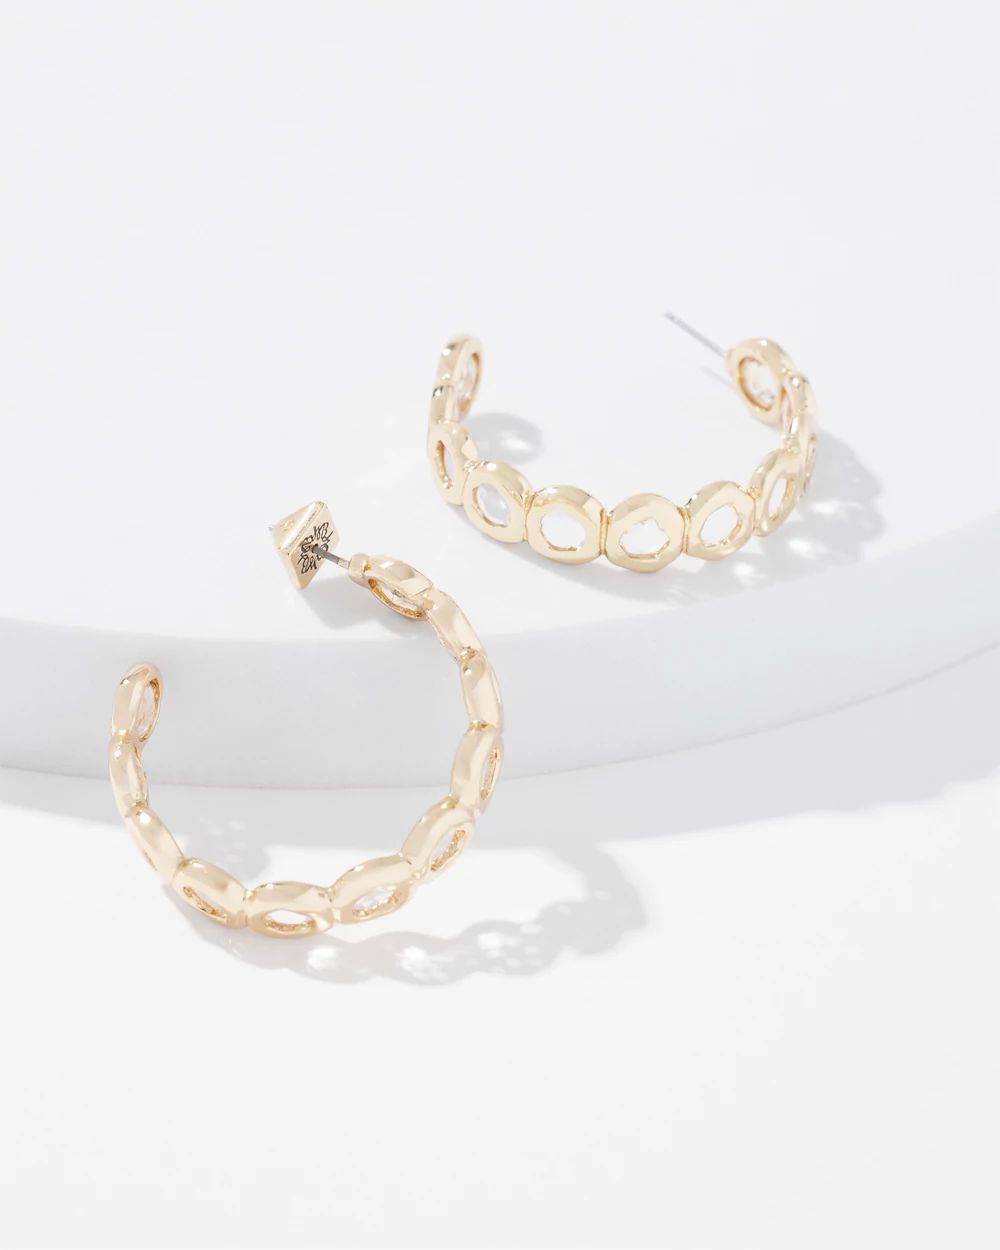 Gold Round Crystal Hoop Earrings click to view larger image.